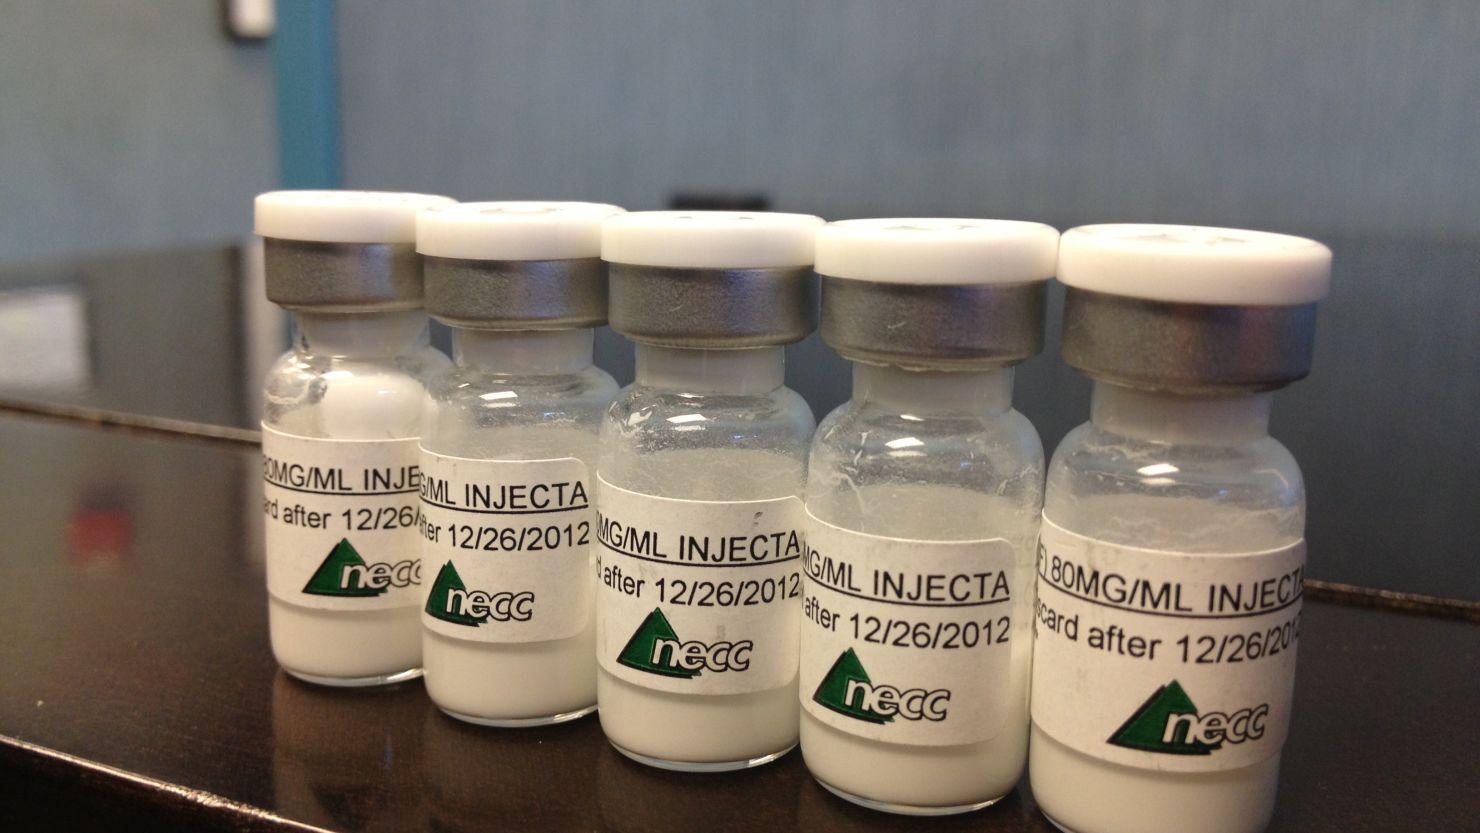 Bottles containing the injectable steroids, distributed by the New England Compounding Center (NECC), suspected in a deadly meningitis outbreak.